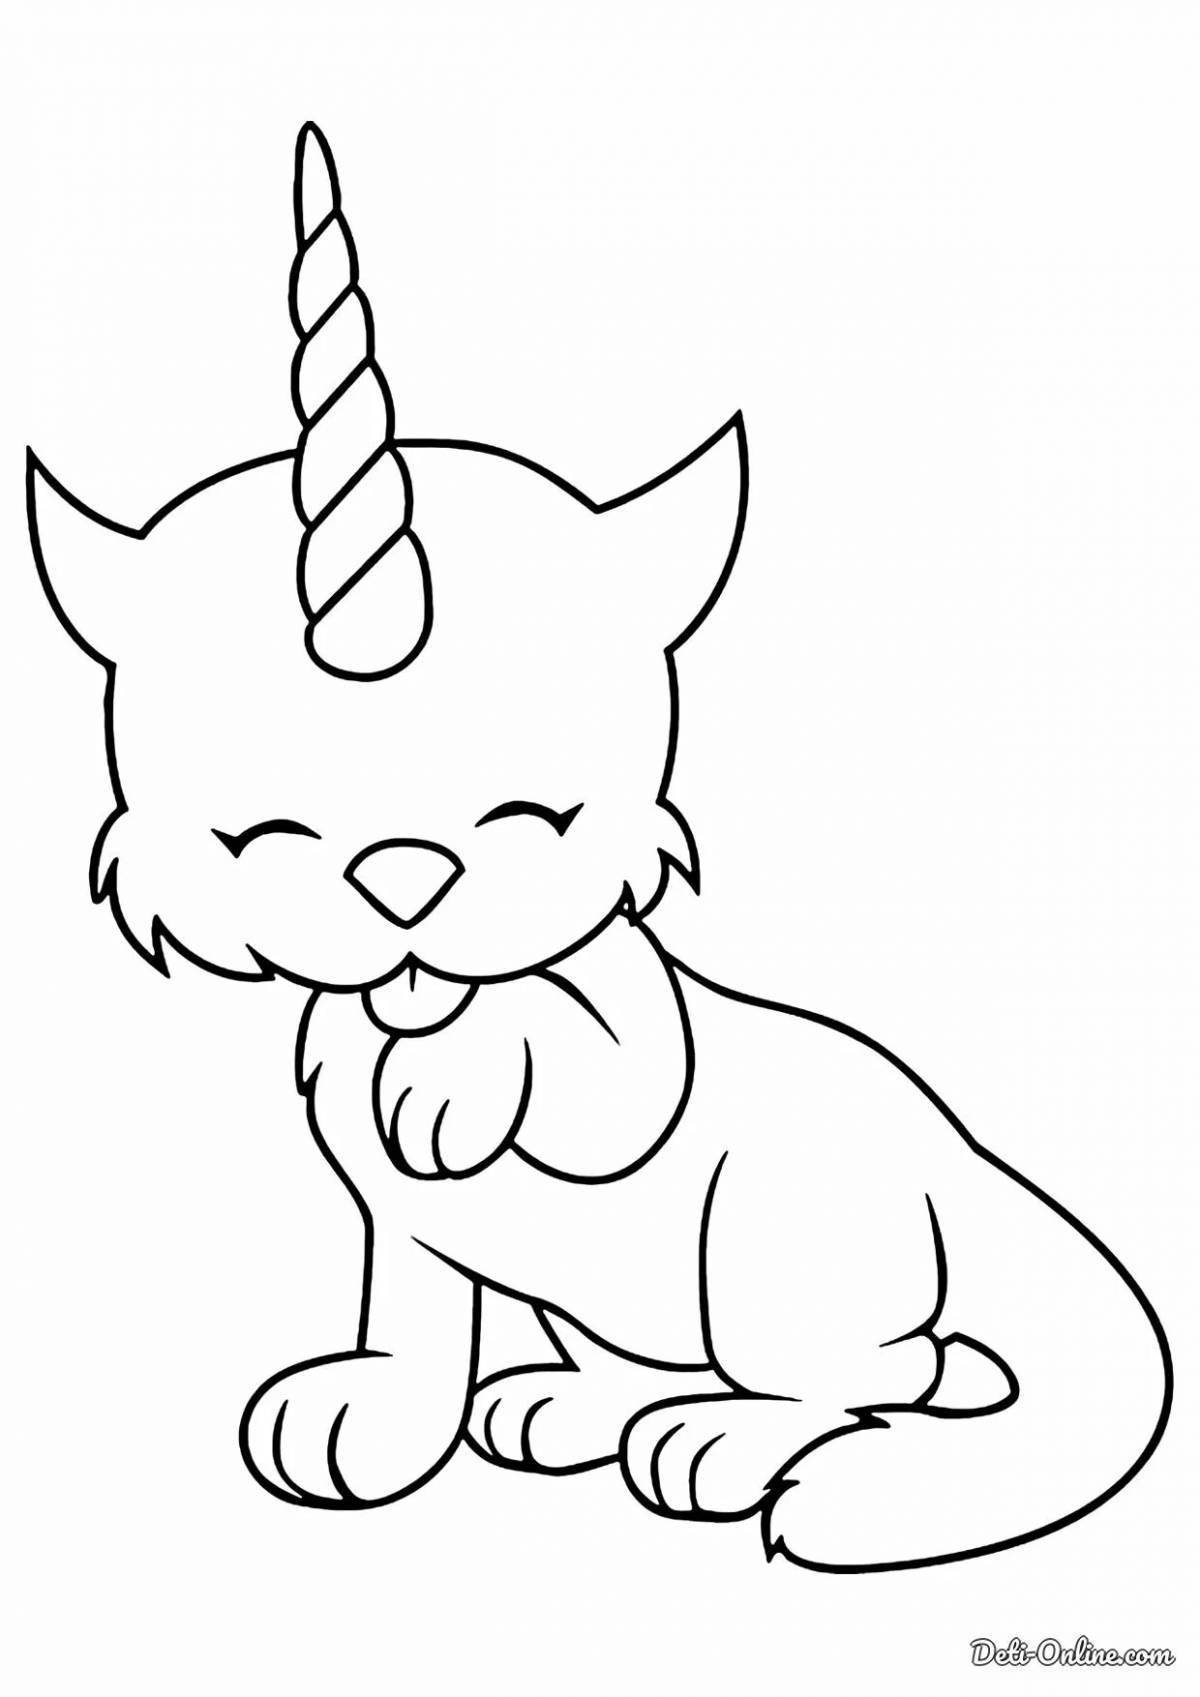 Coloring page cute cat felicity